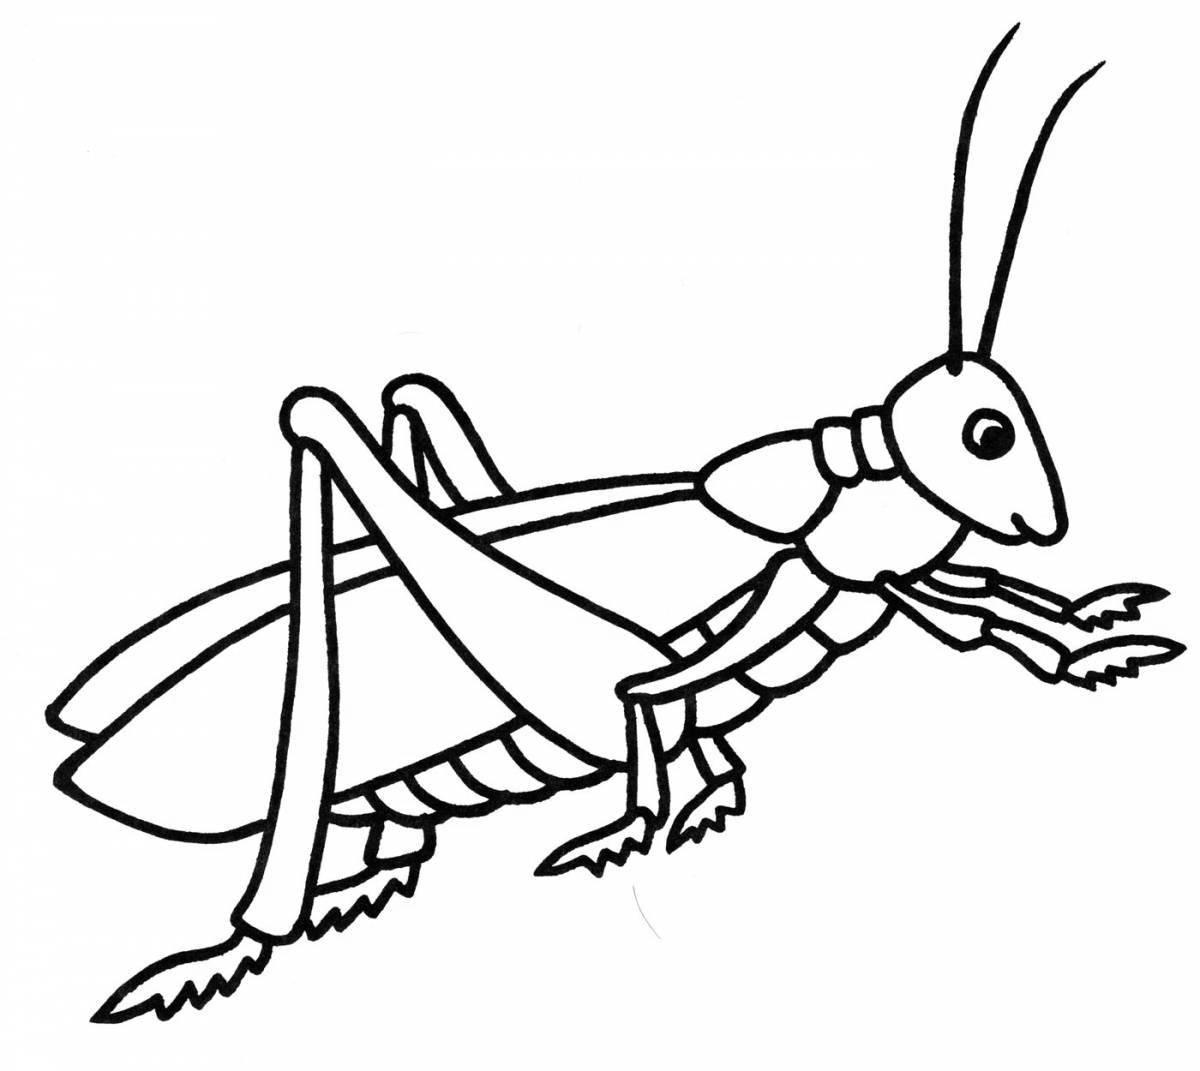 Playful cricket coloring page